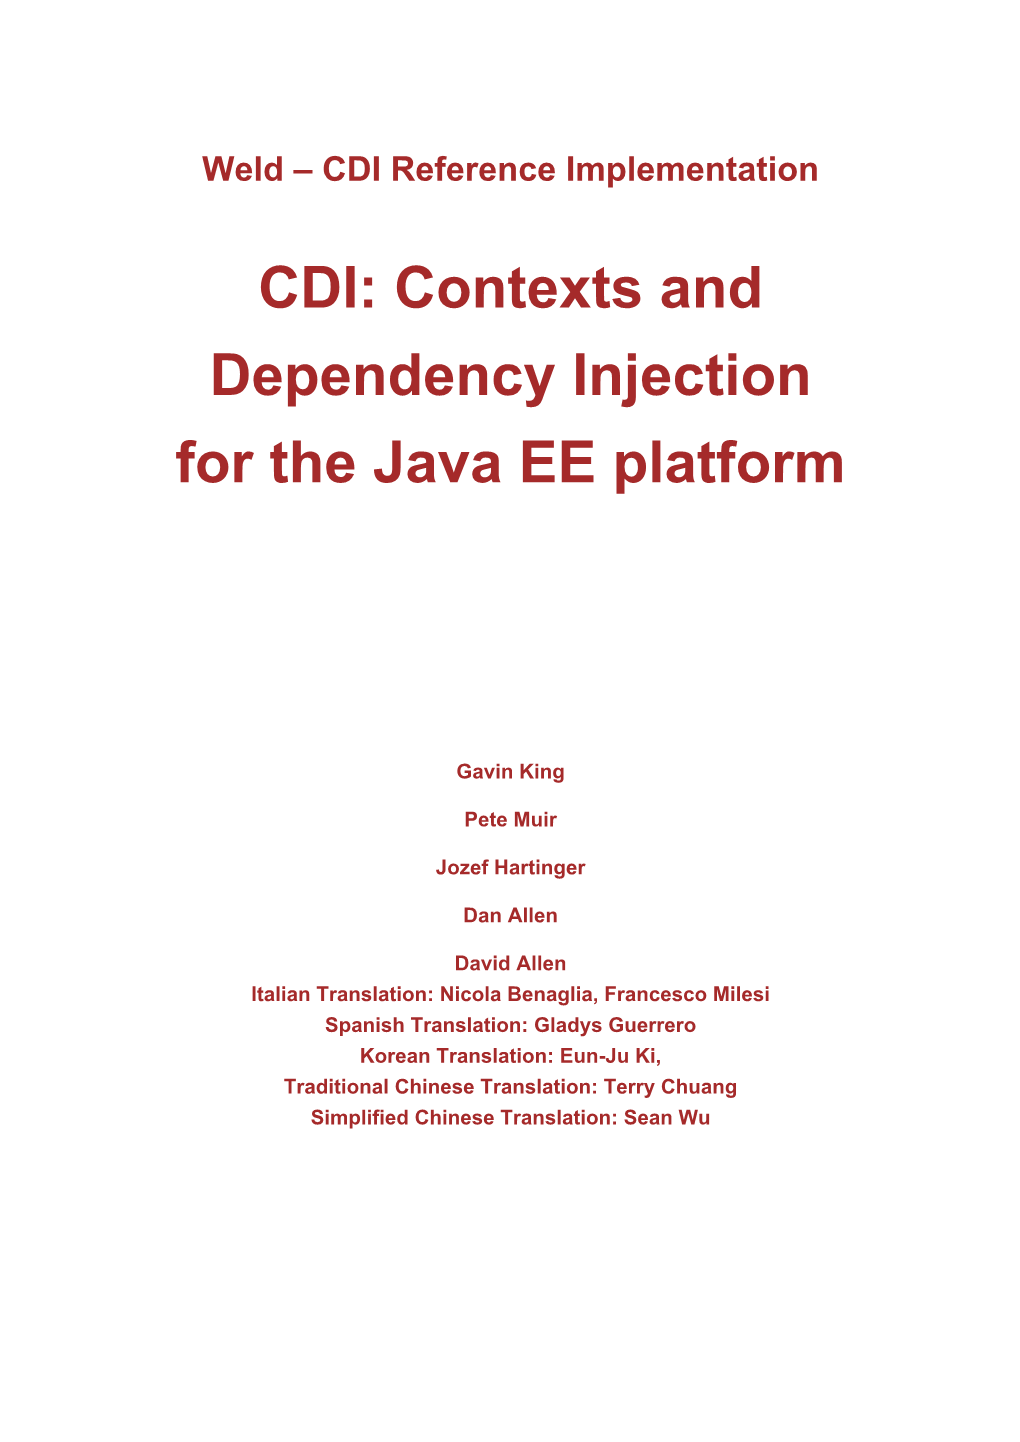 CDI: Contexts and Dependency Injection for the Java EE Platform